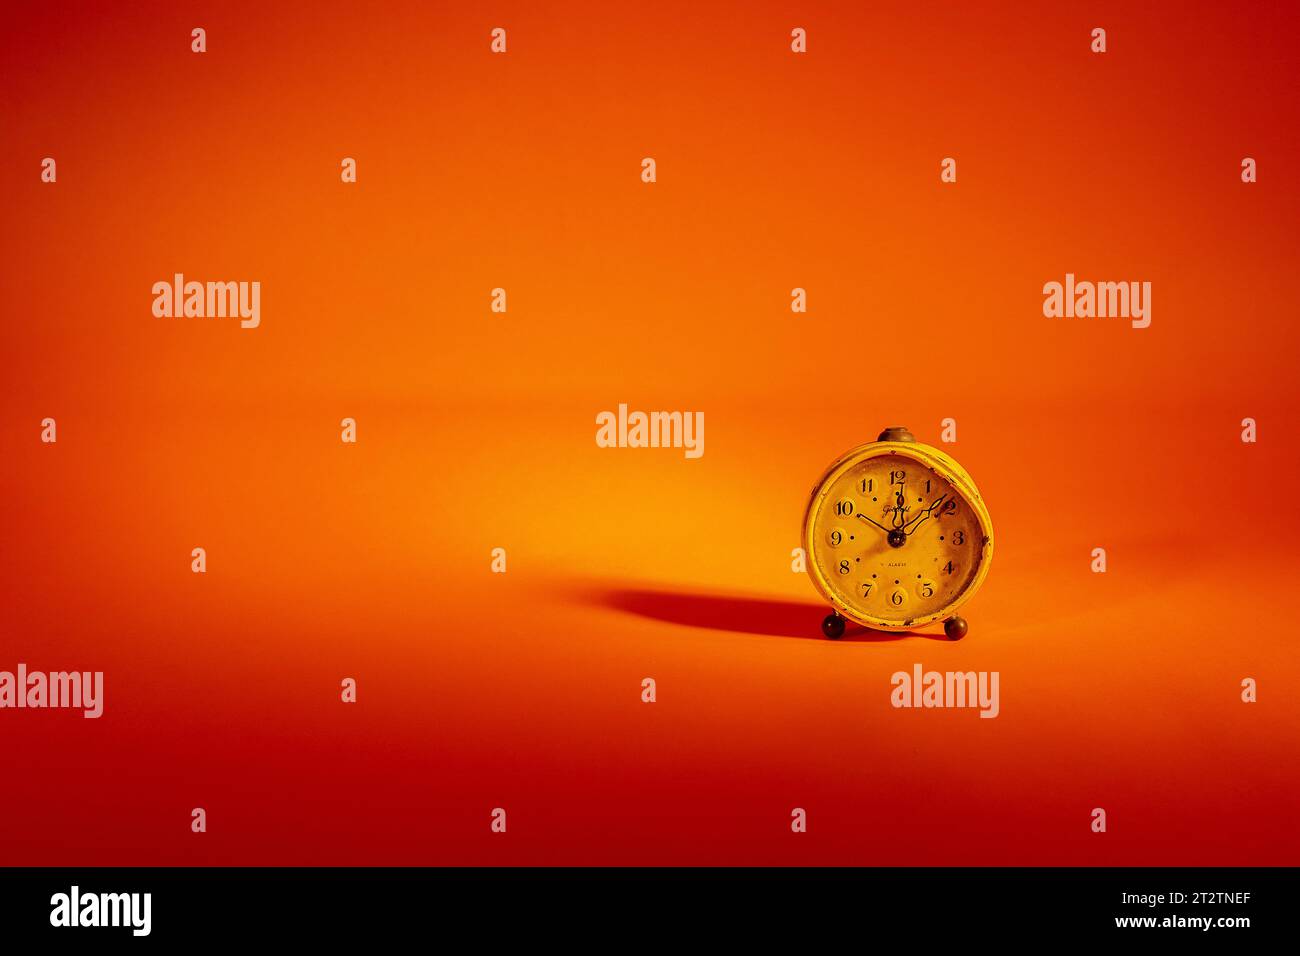 Old clock with a bold shadow in a orange background Stock Photo